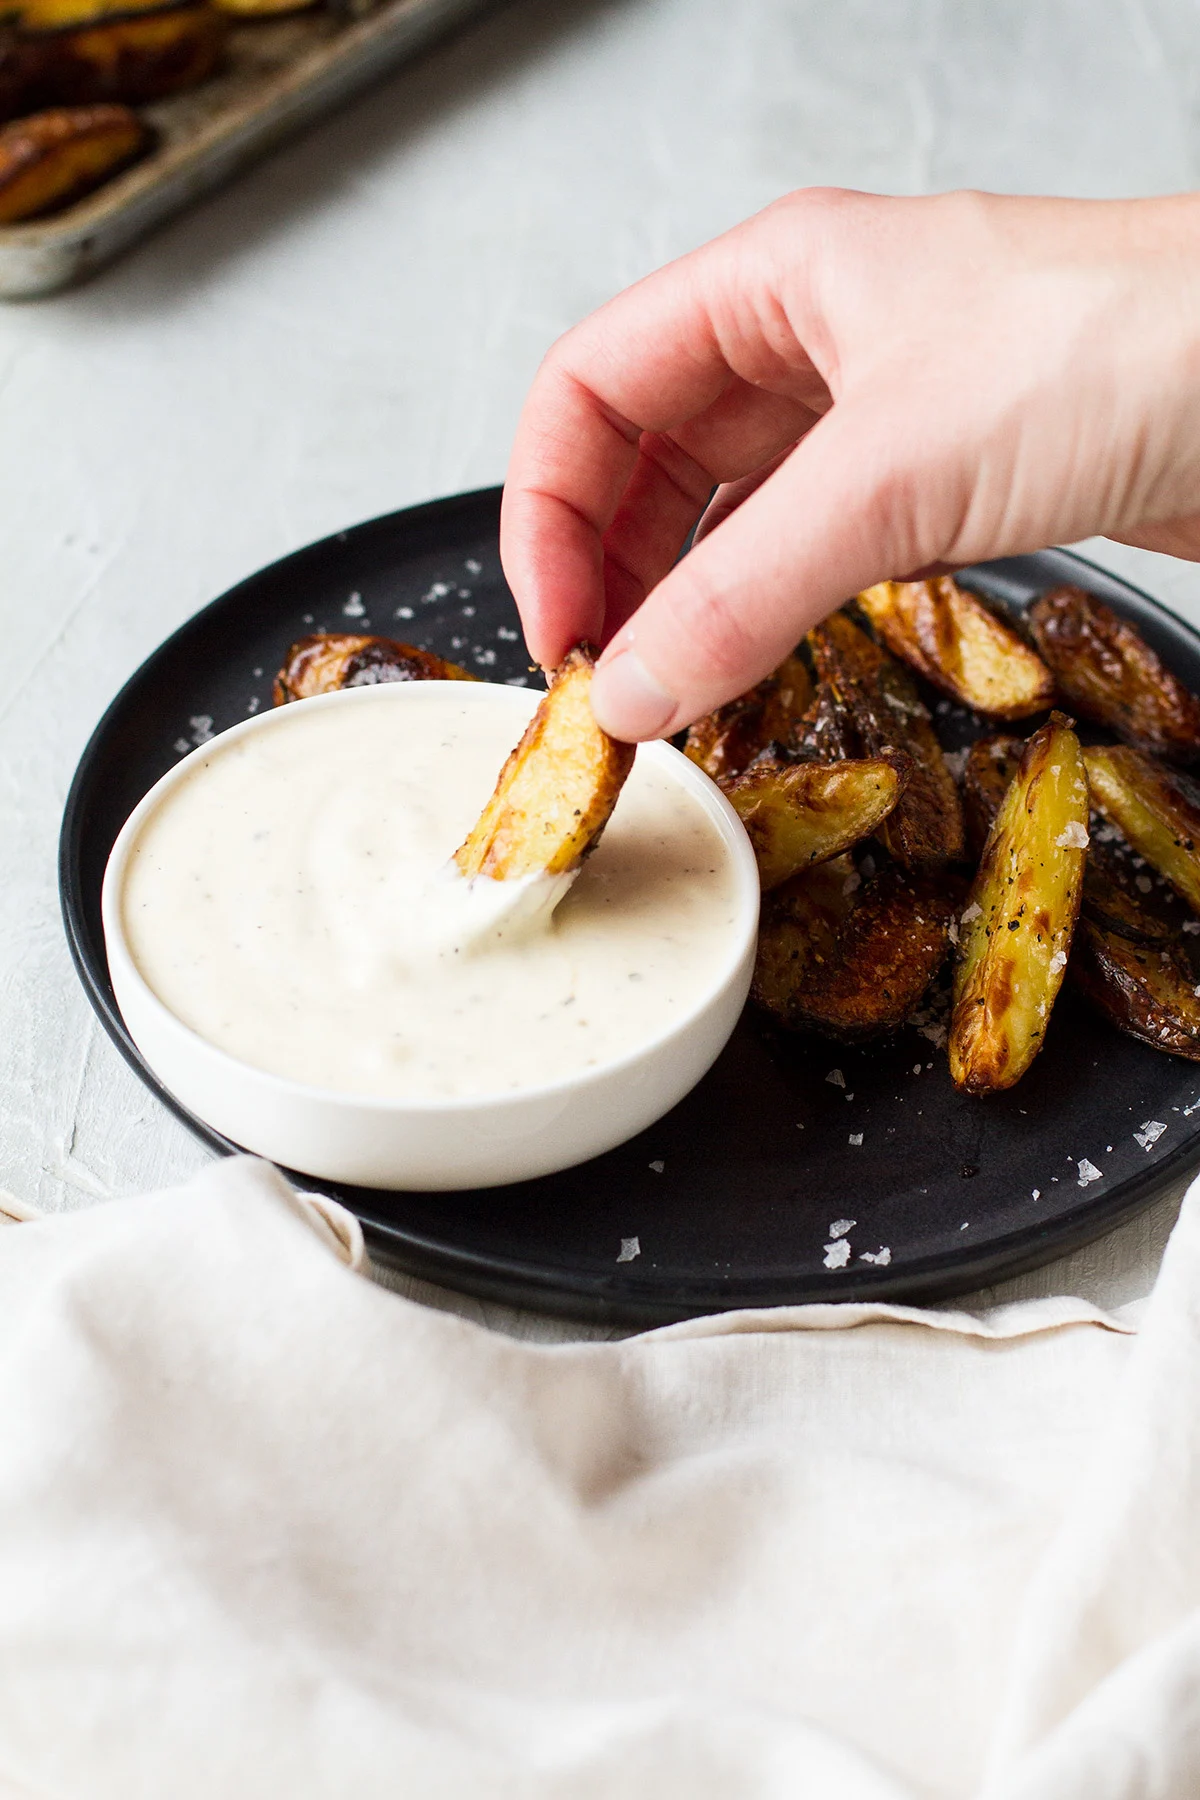 Hand dipping a potato wedge in a pickle dip.